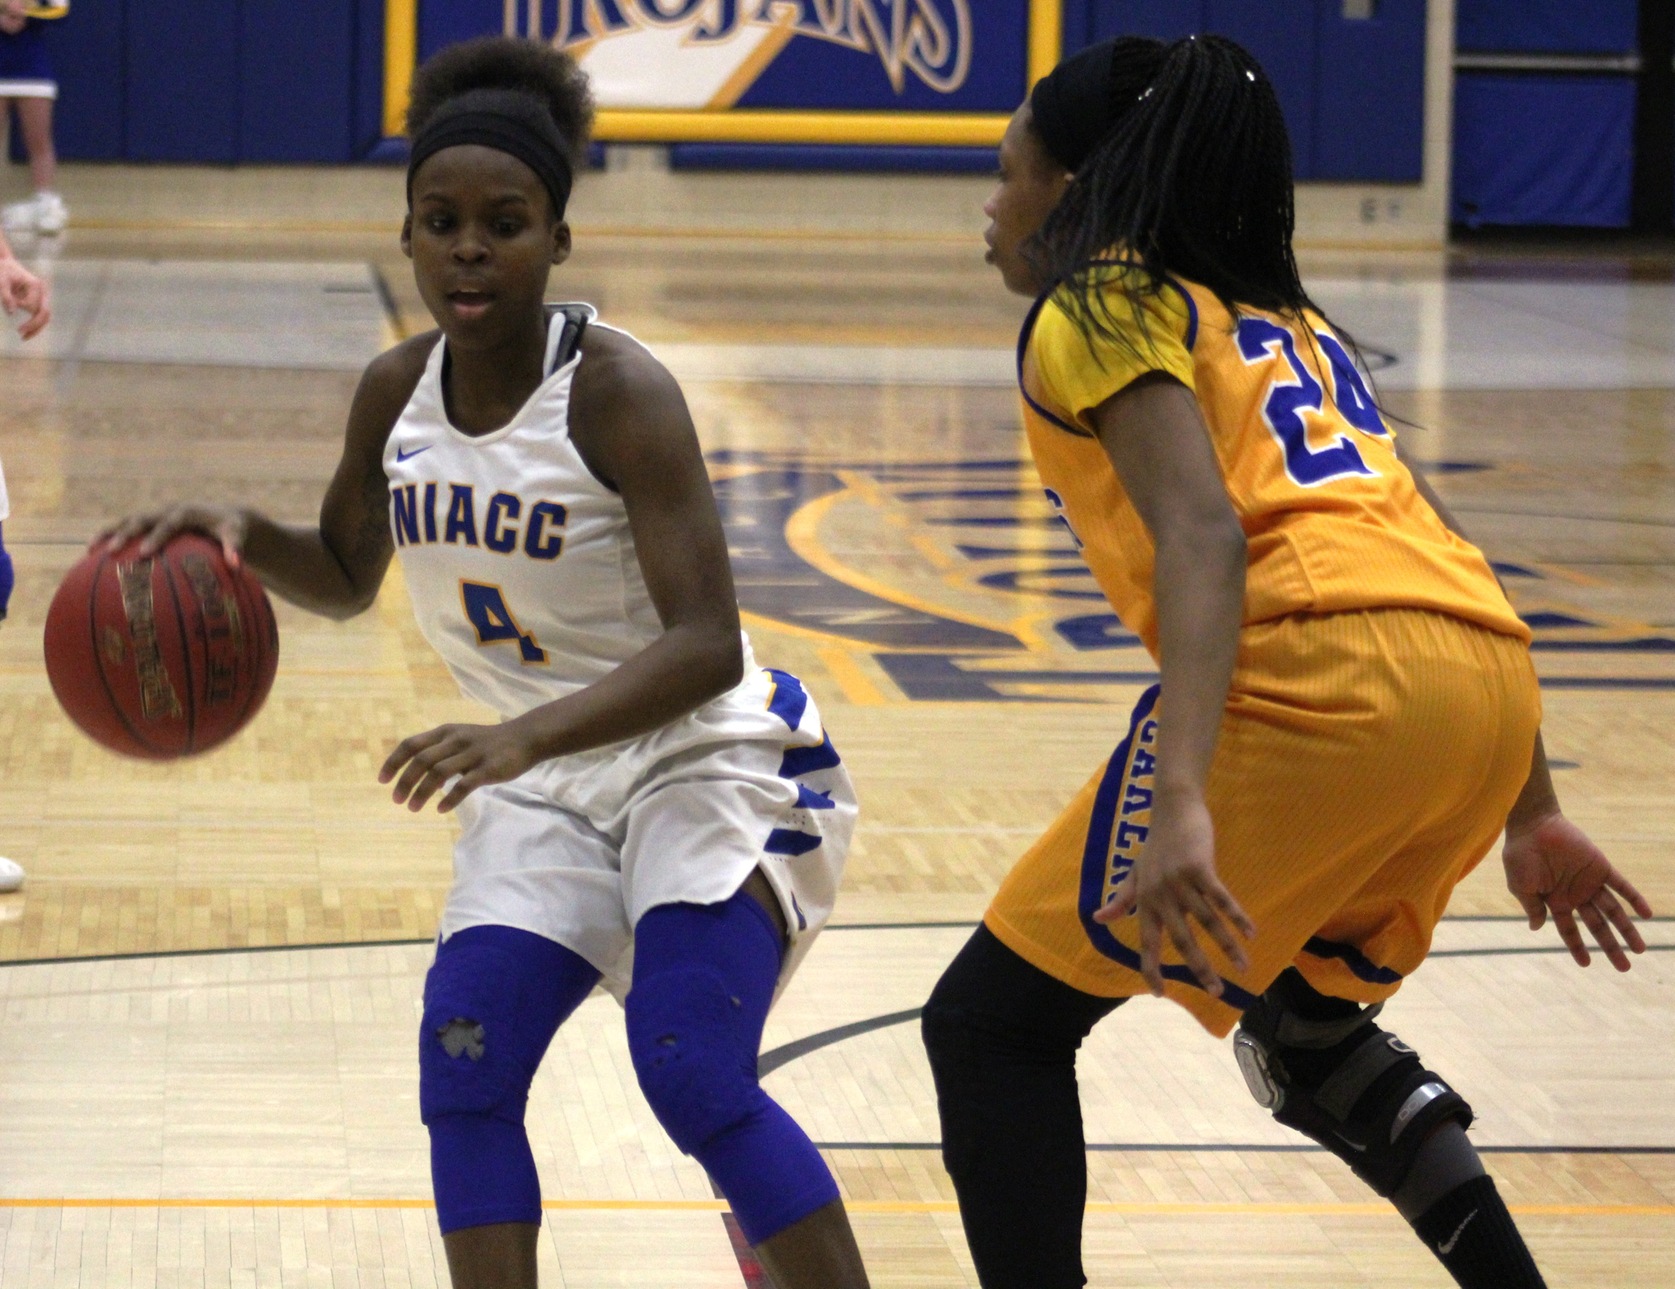 NIACC's UU Longs brings the ball up the floor in a game against Iowa Lakes earlier this season.